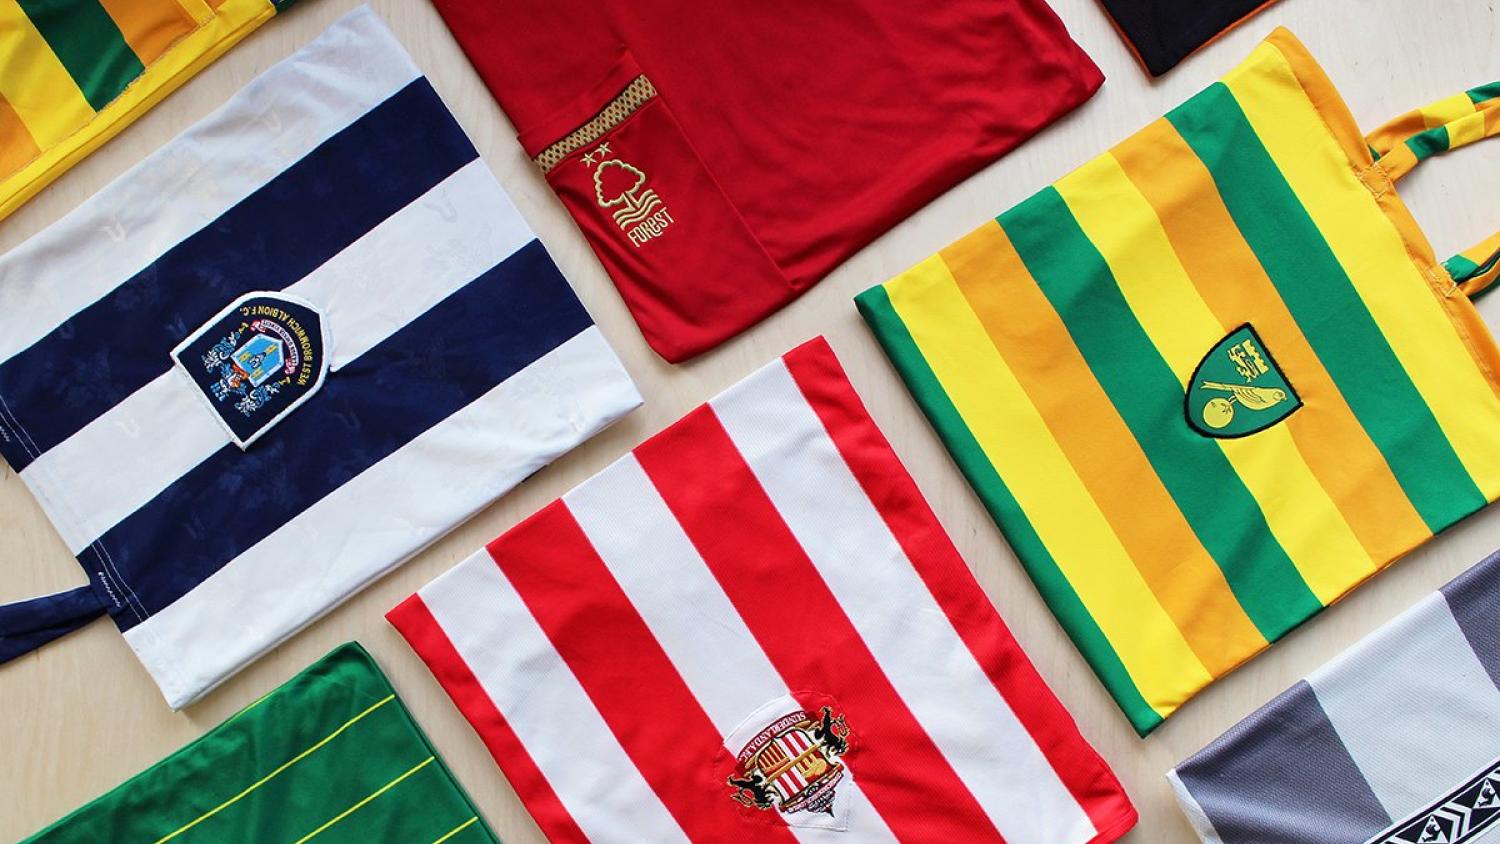 Reusable Grocery Bags Featuring Vintage Football Shirts? Yes Please